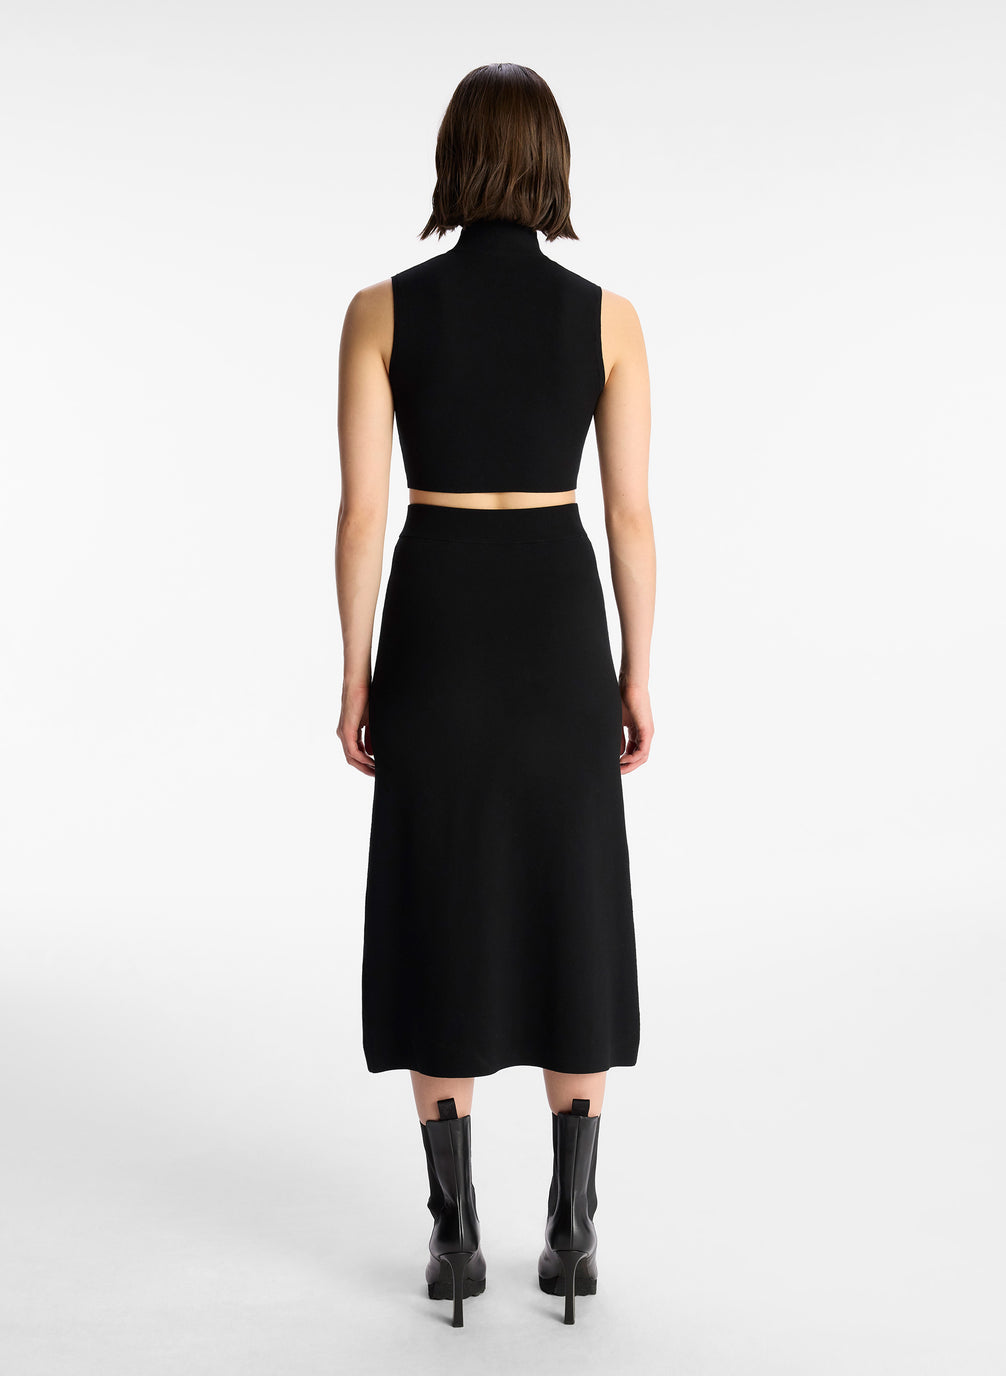 back view of woman wearing black half zip sleeveless crop top and black midi skirt with contrast zipper